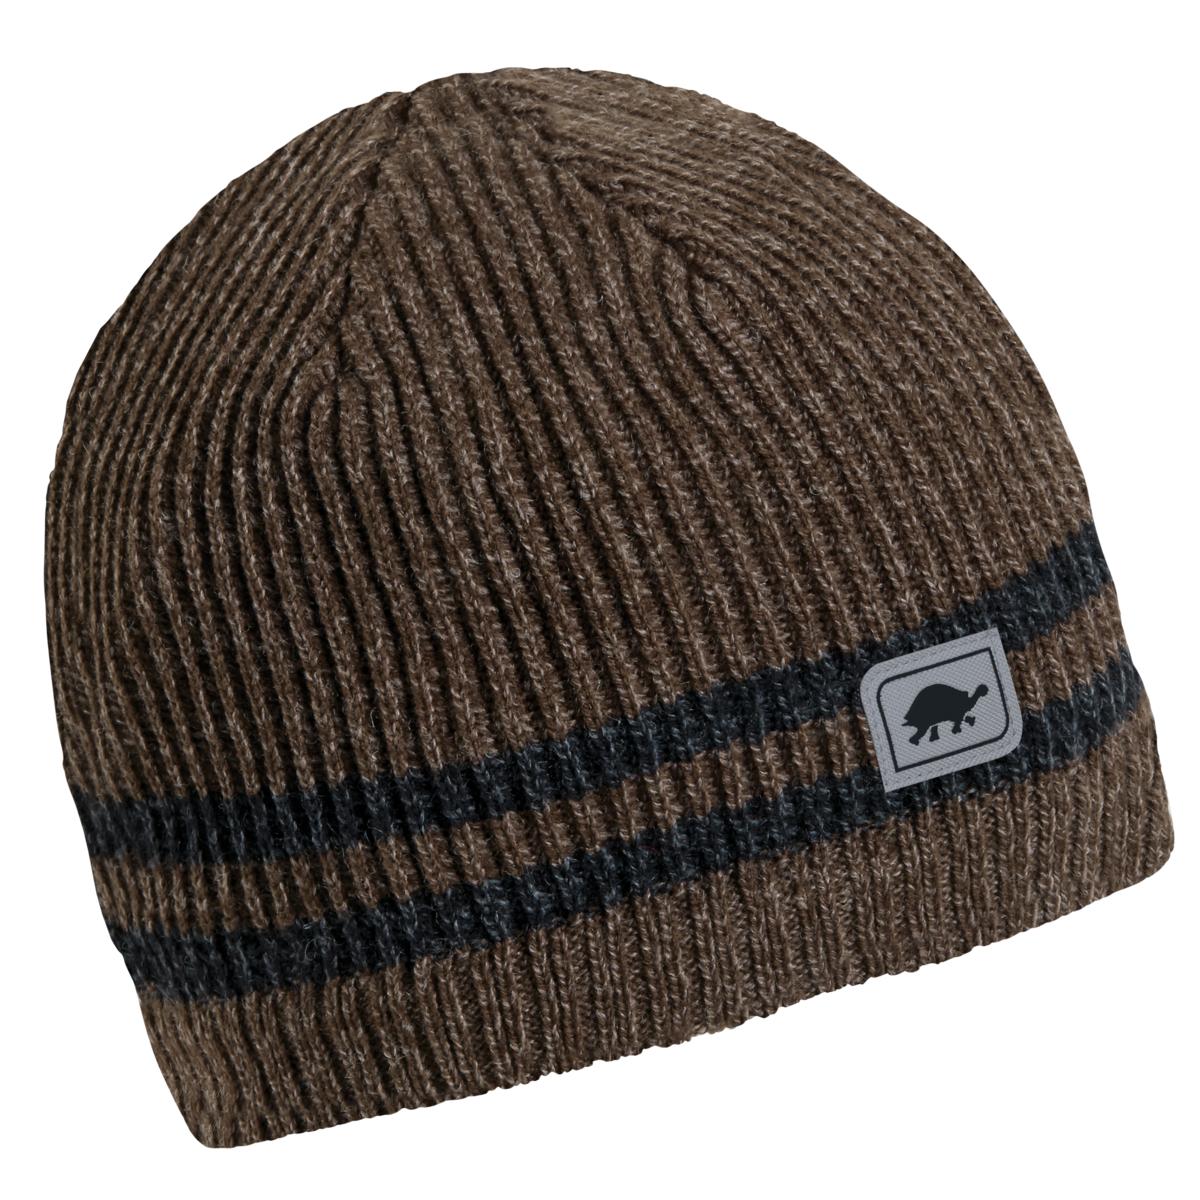 Turtle Fur Wool Blend Relaxed Fit Beanie | Mr Happy Earth